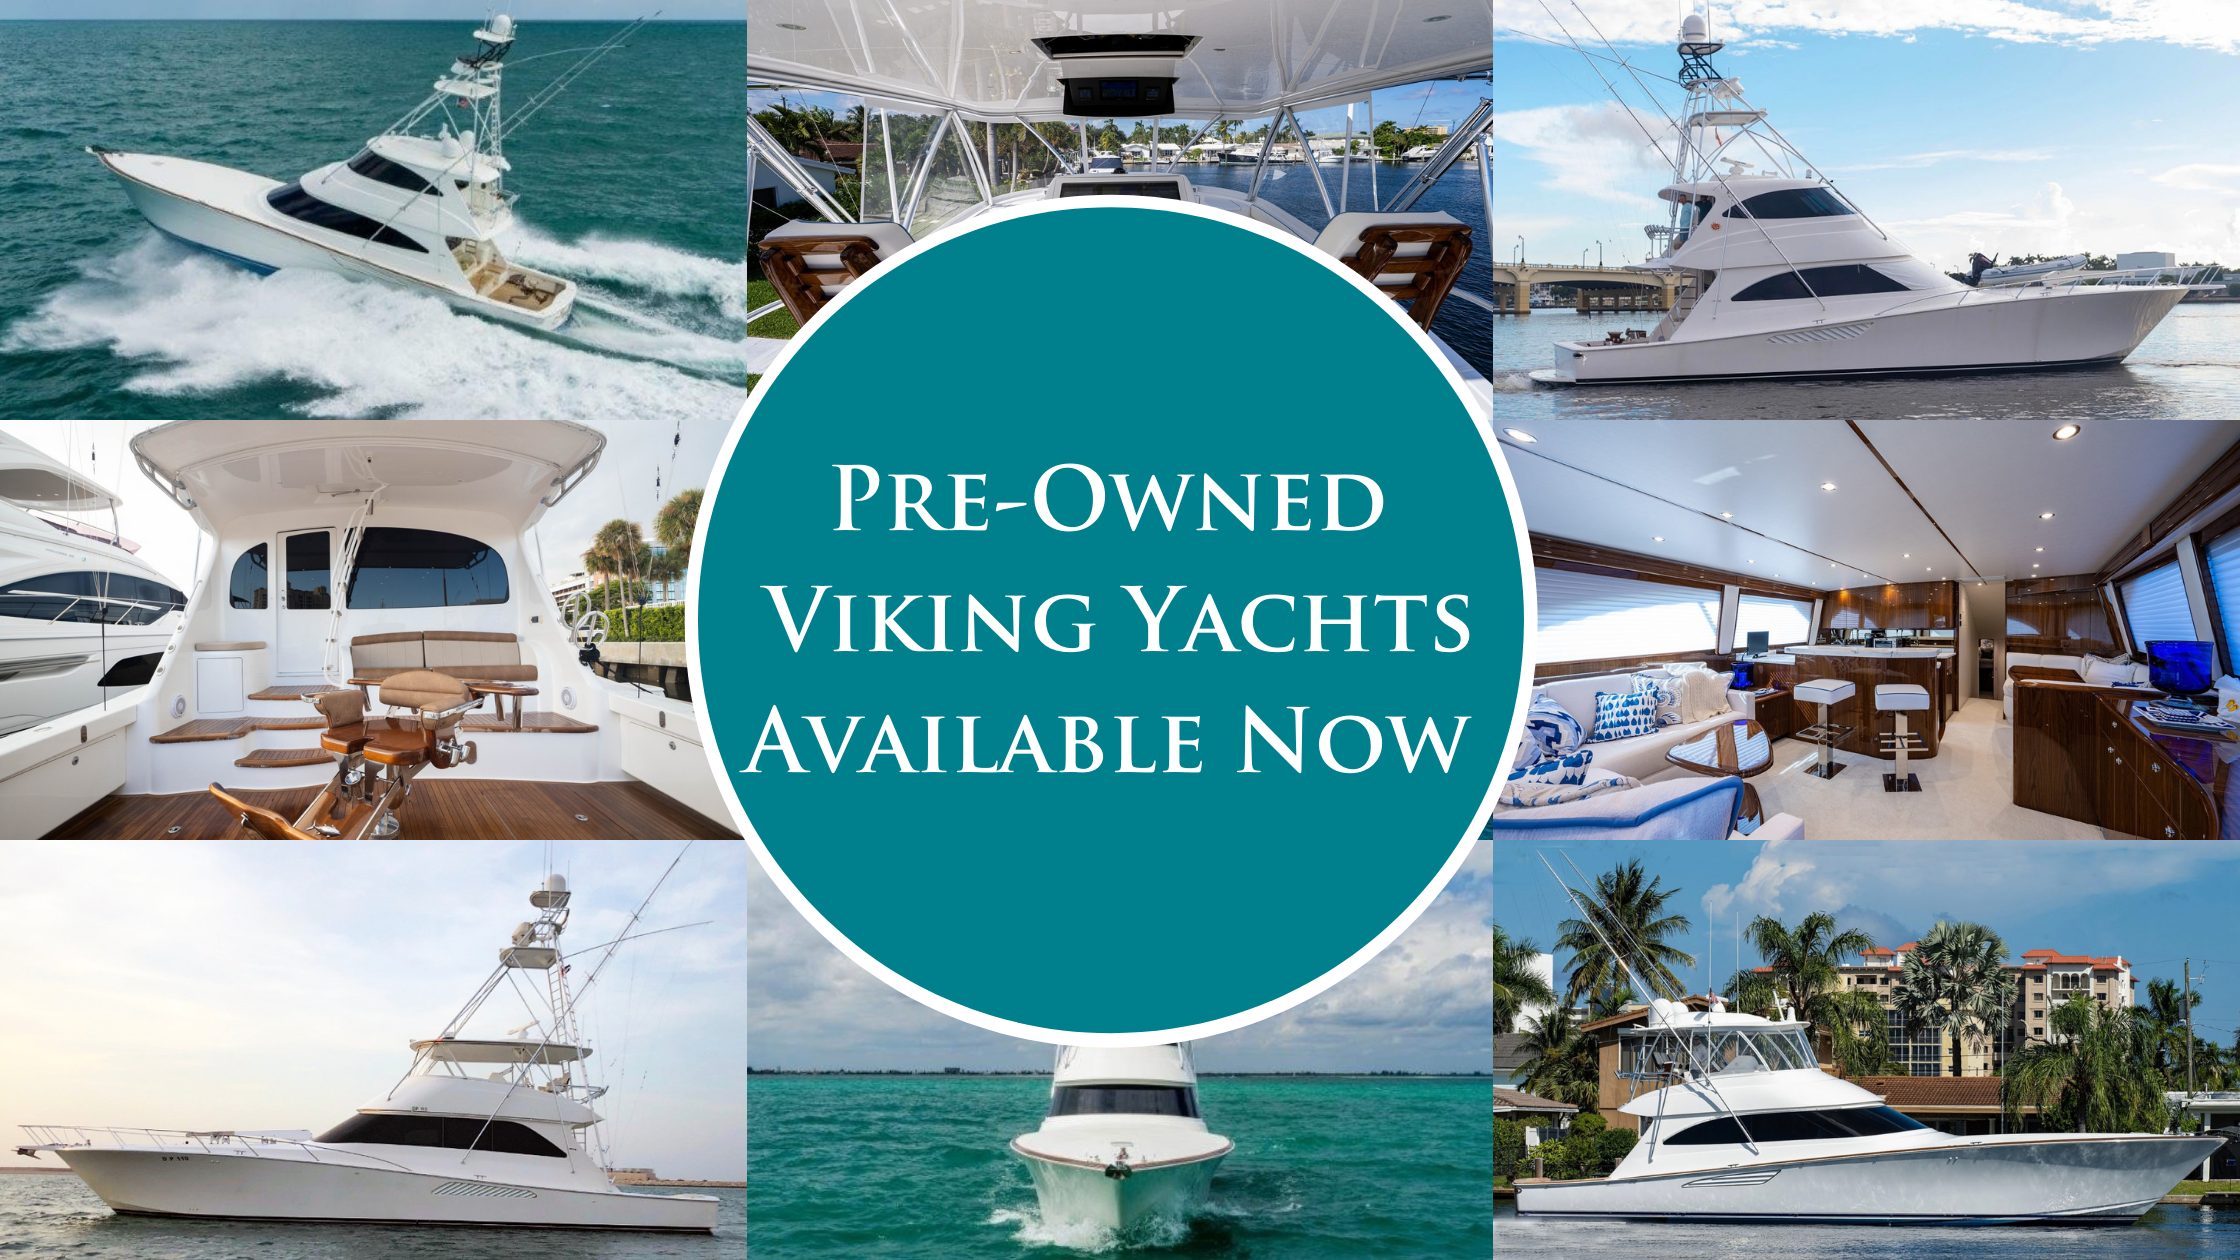 HMY Spotlight: 5 Pre-Owned Viking Yachts Ready for Action